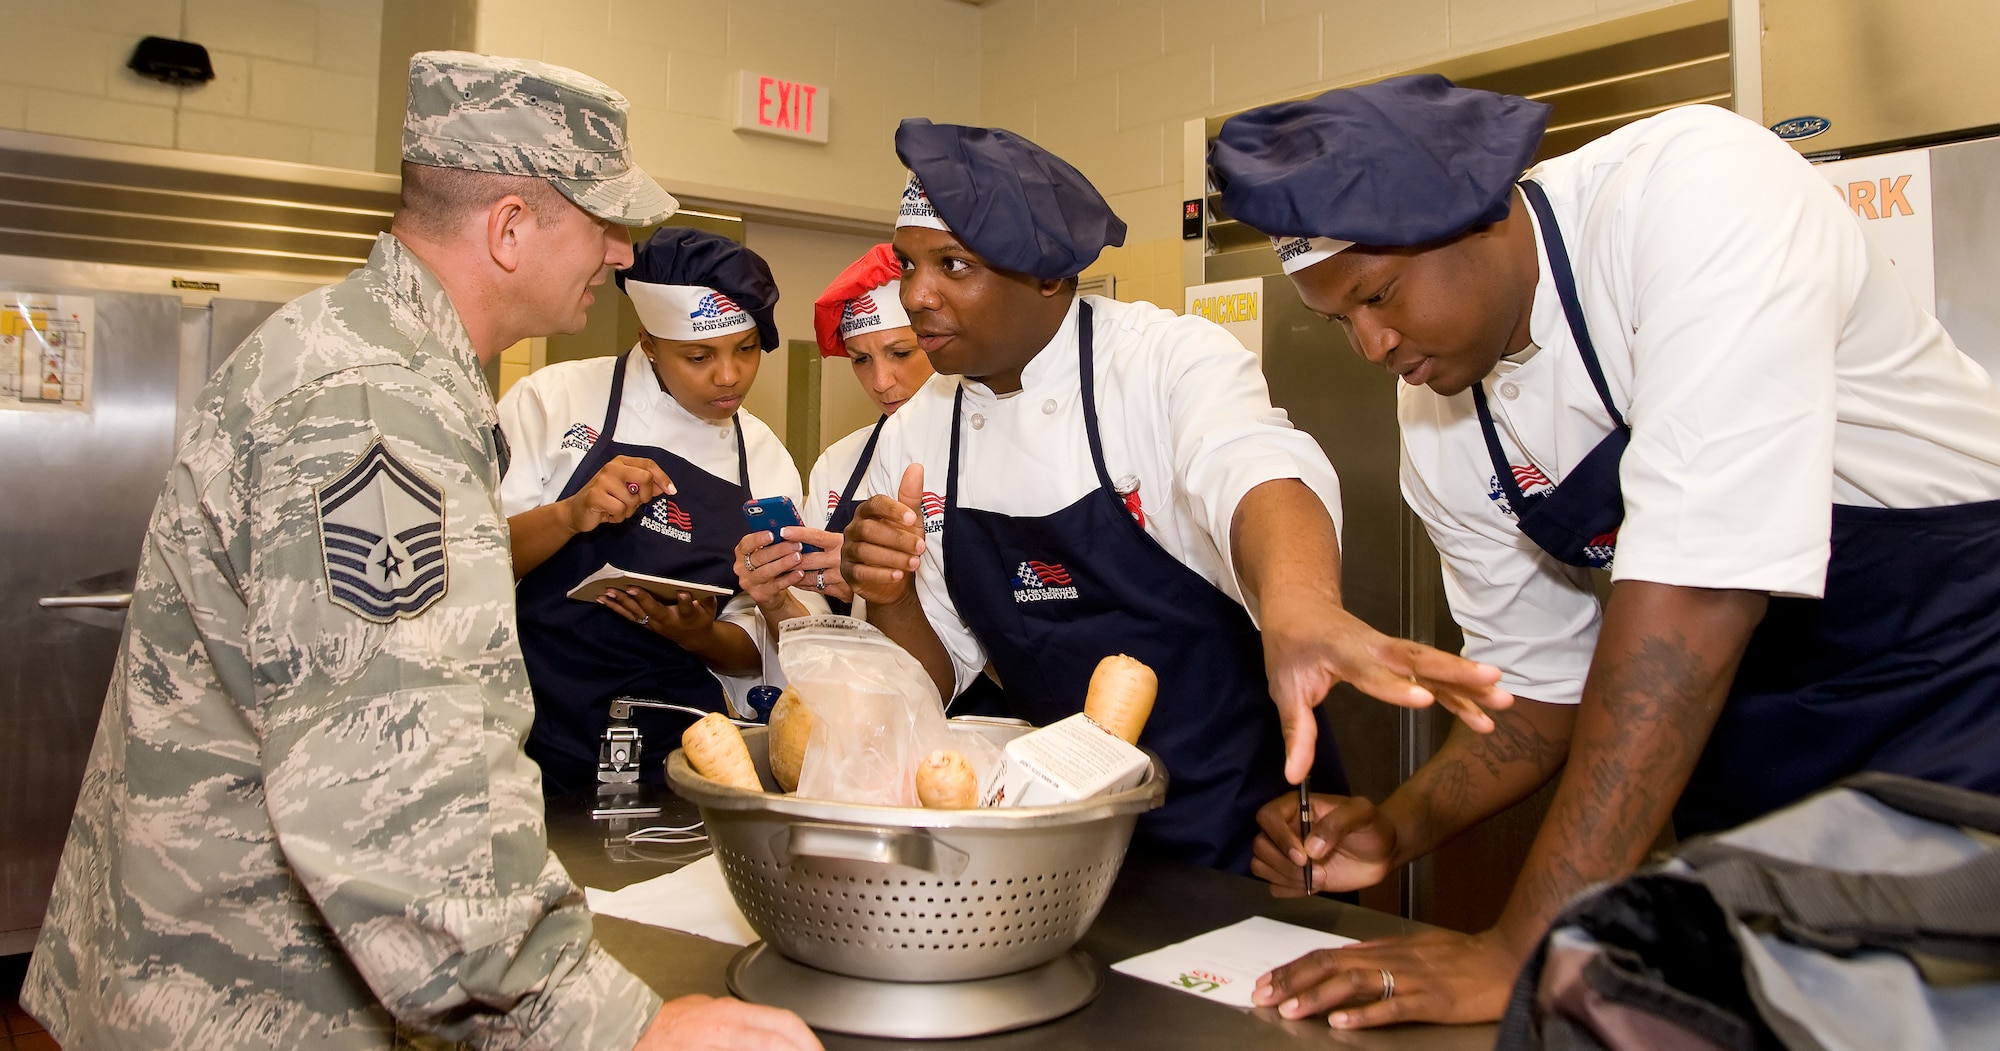 Staff Sgt. Earl Simmons, second from right, 315th FSS, Joint Base Charleston, S.C., discusses their menu plan with Senior Master Sgt. Brian Denny, left, Air Force Mortuary Affairs Operations port mortuary superintendent, during the Dover Iron Chef competition July 24, 2014, at the Patterson Dining Facility on Dover Air Force Base, Del. Simmons and three other members on the AFMAO team had two and a half hours to prepare, cook and present their appetizer, entrée and dessert to a panel of three judges. (U.S. Air Force photo/Roland Balik)